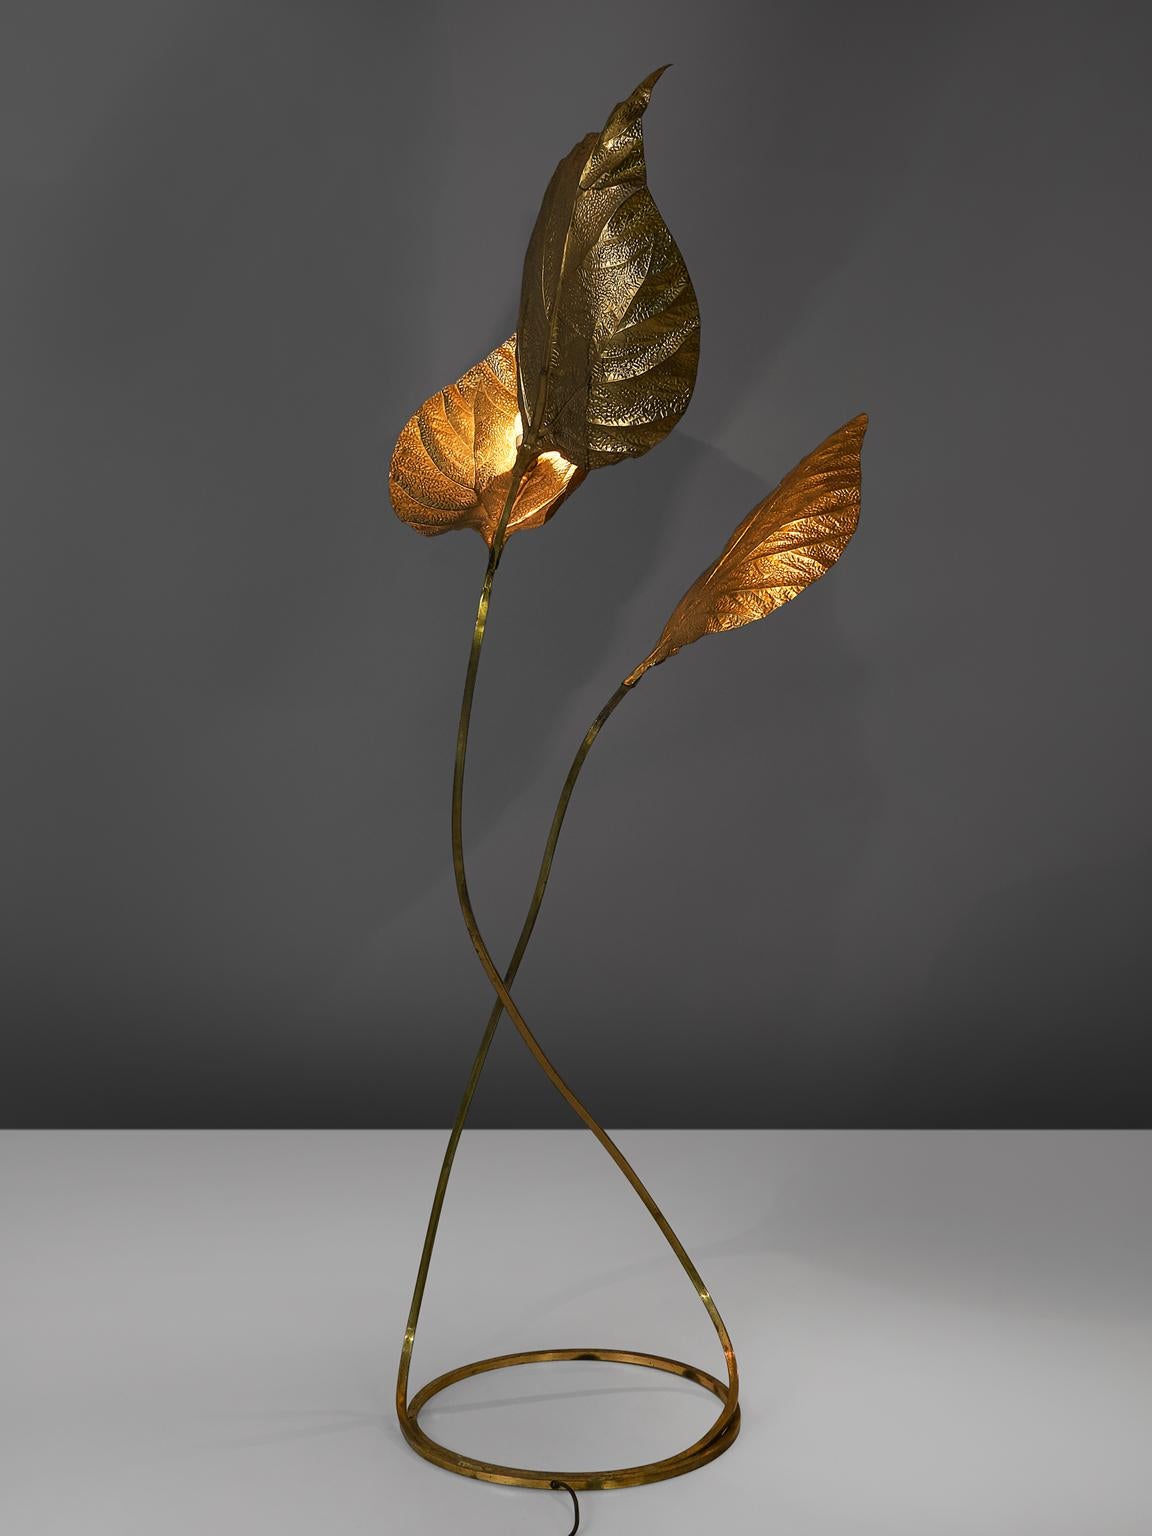 Carlo Giorgi for Bottega Gadda, brass 'rhubarb' leaf lamp, Italy, 1970s

This large triple leaf floor lamp is designed by Carlo Giorgi and produced in Italy in the 1970s. This biomorphic, hand-hammered brass floor lamp resembles a large rhubarb